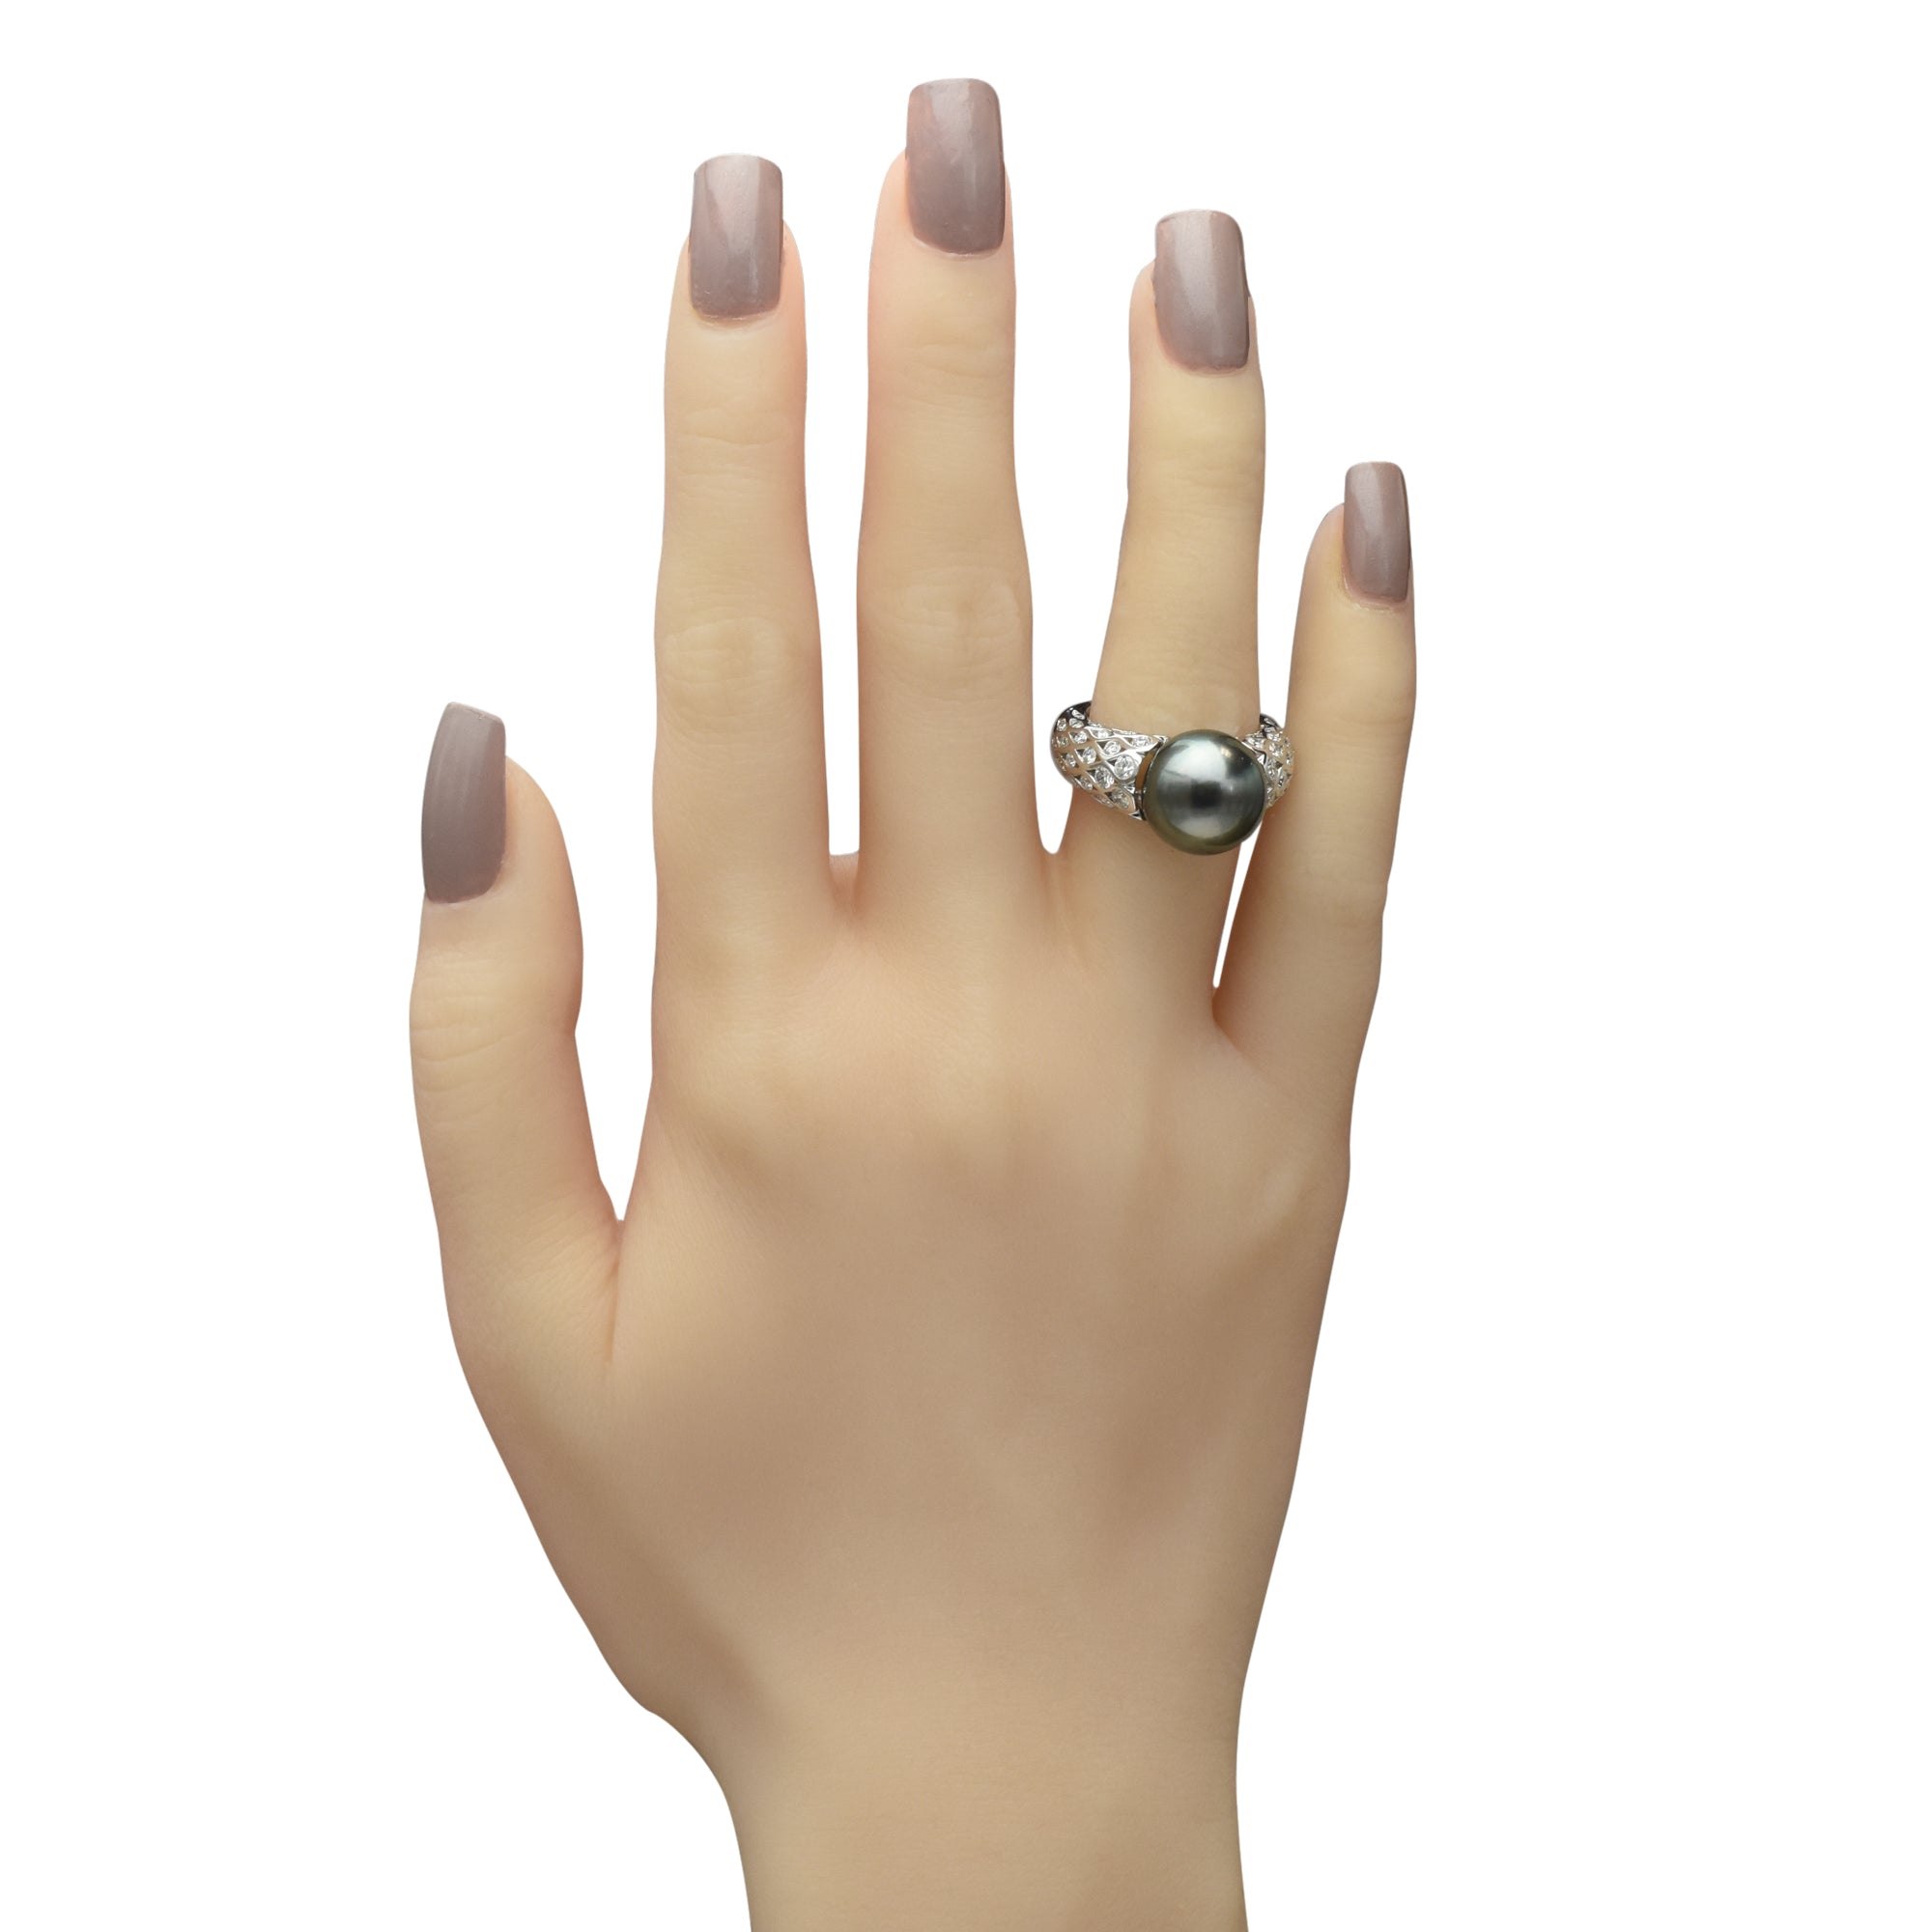 Black Tahitian Pearl Ring in 14kt White Gold with Diamonds (1 5/8ct tw) (12-13mm pearl)